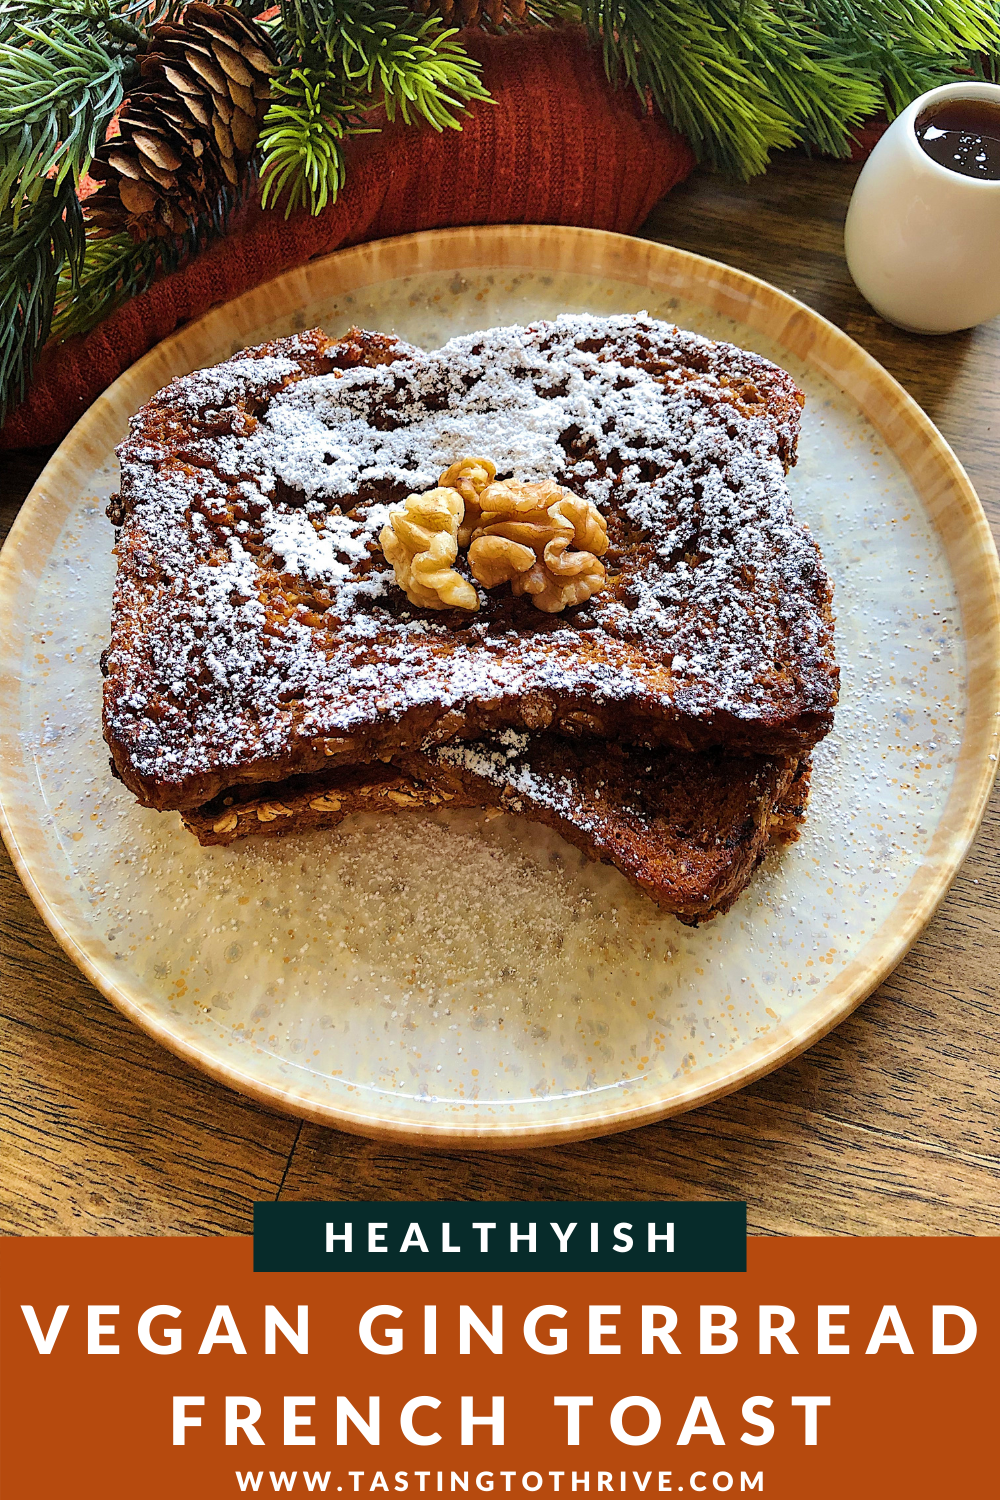 Gingerbread Vegan French Toast